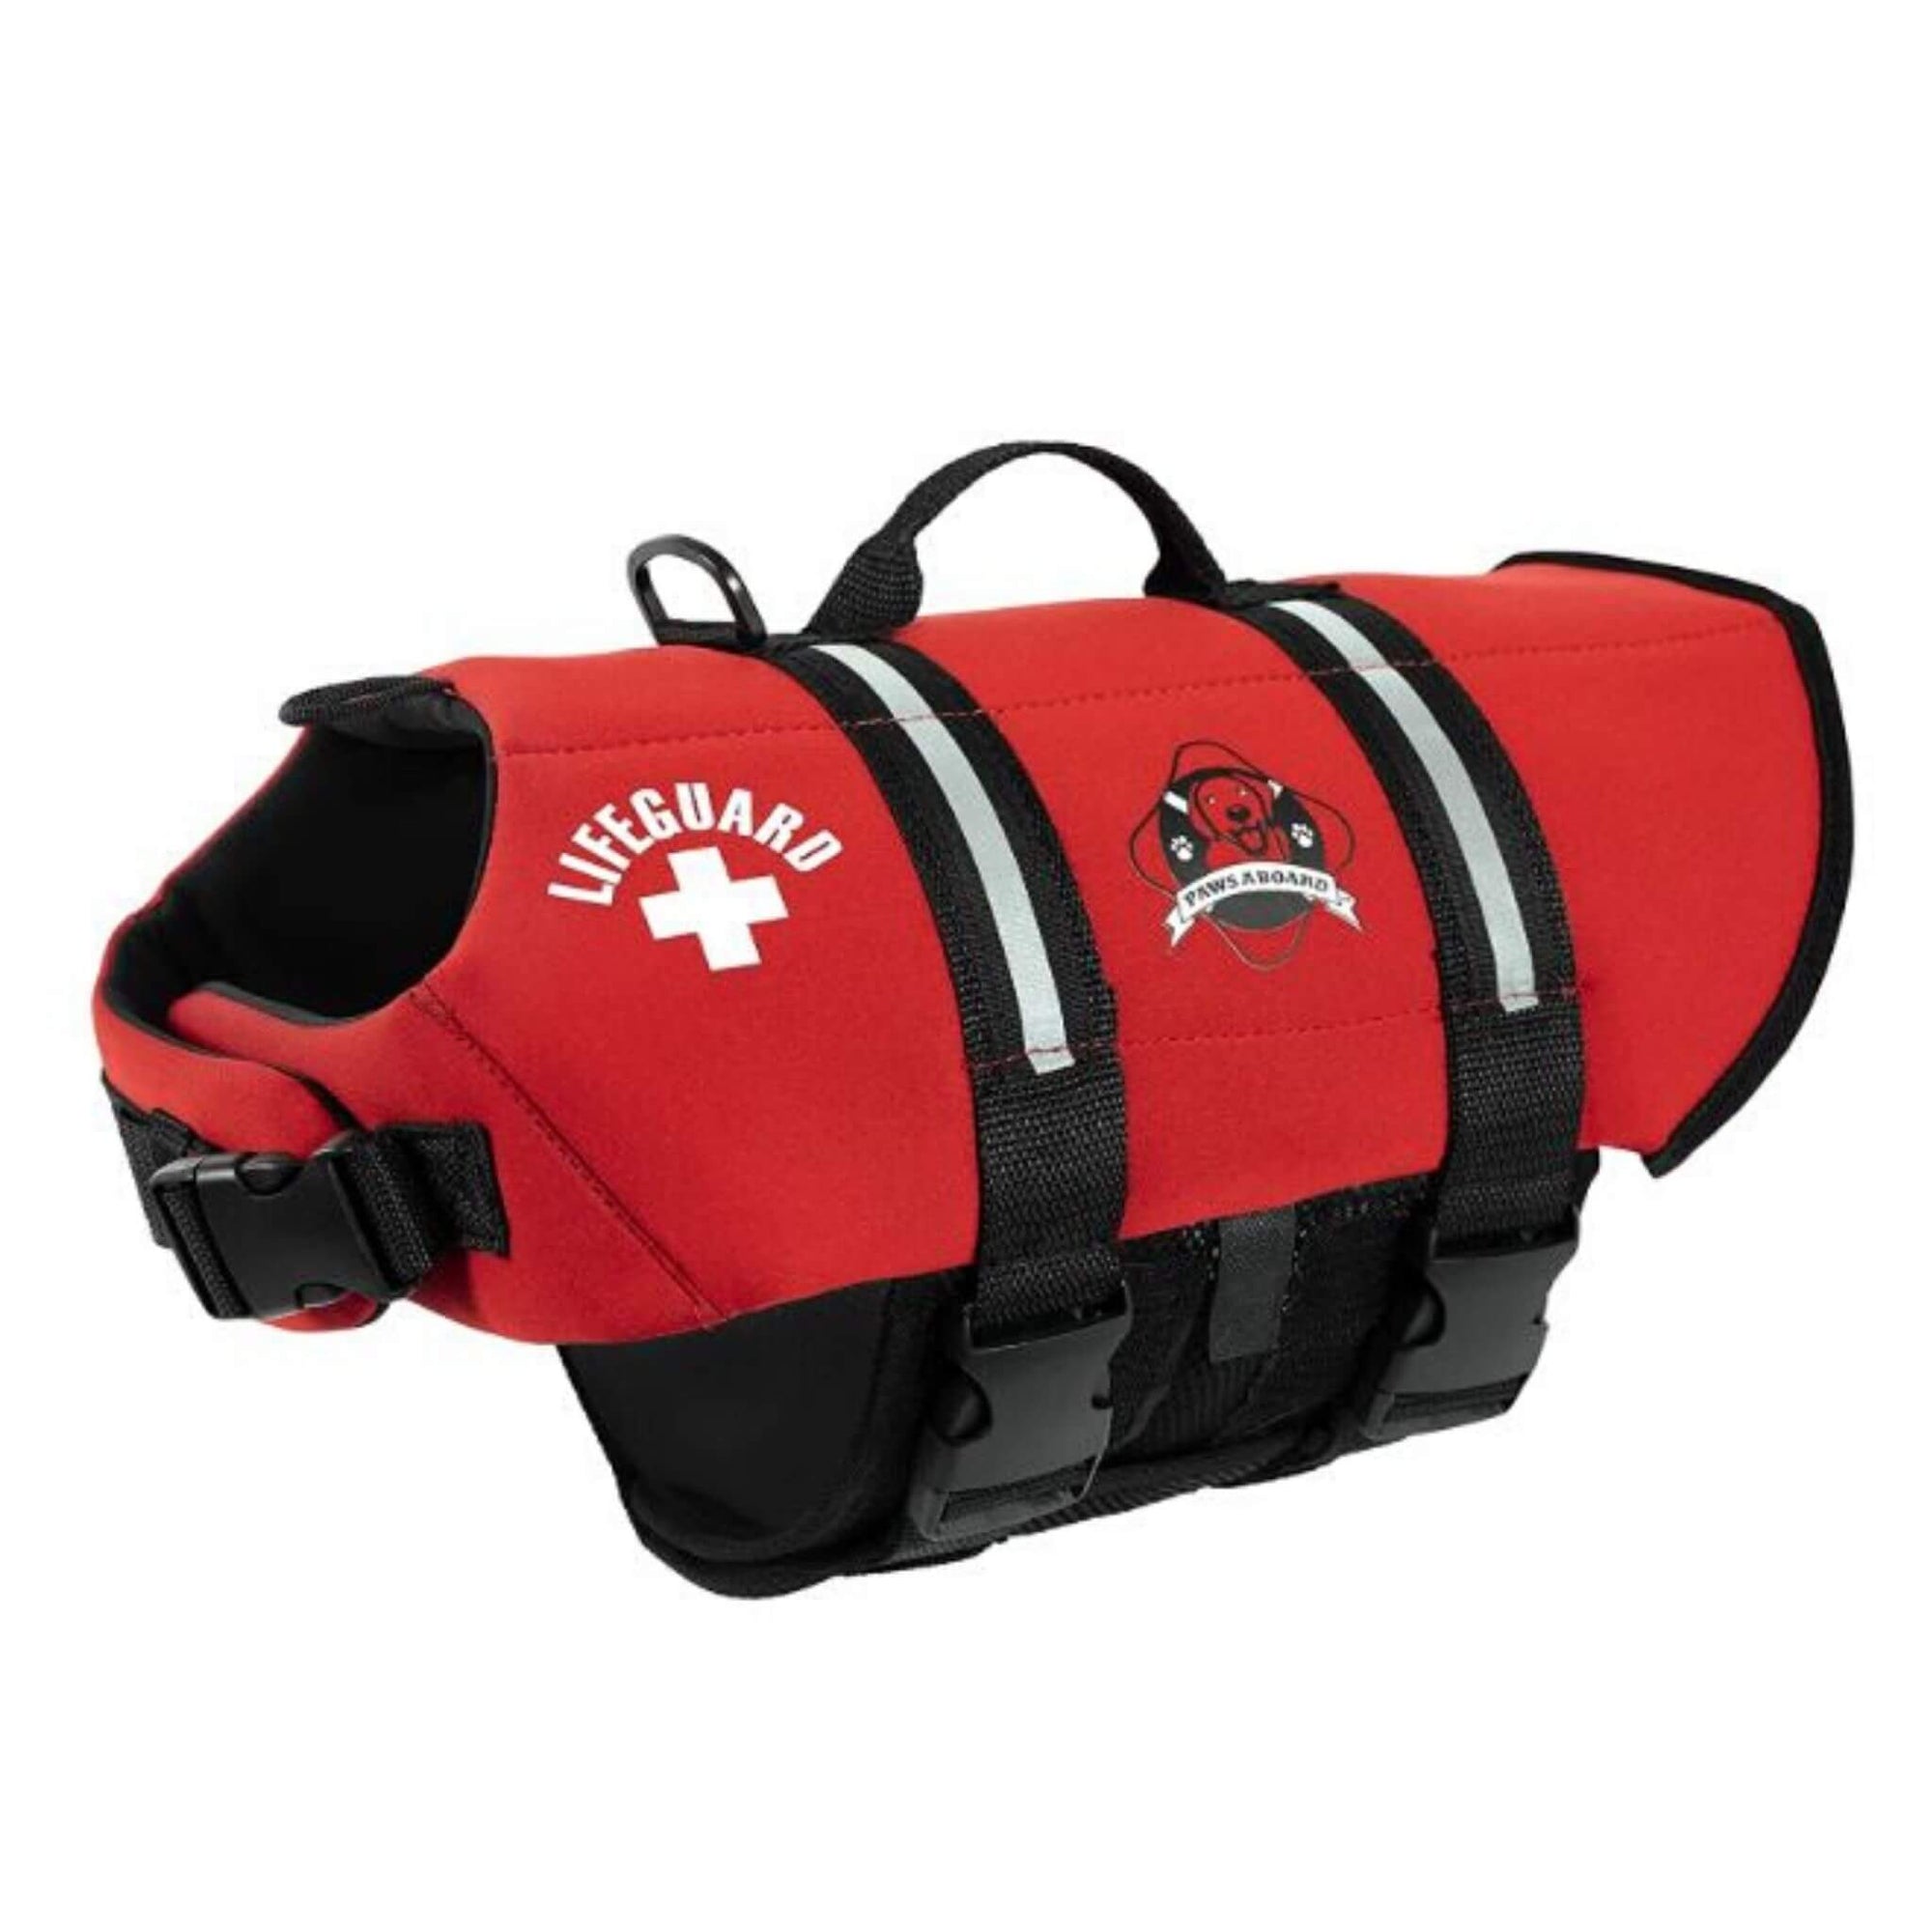 Paws Aboard Dog Life Jacket - Red